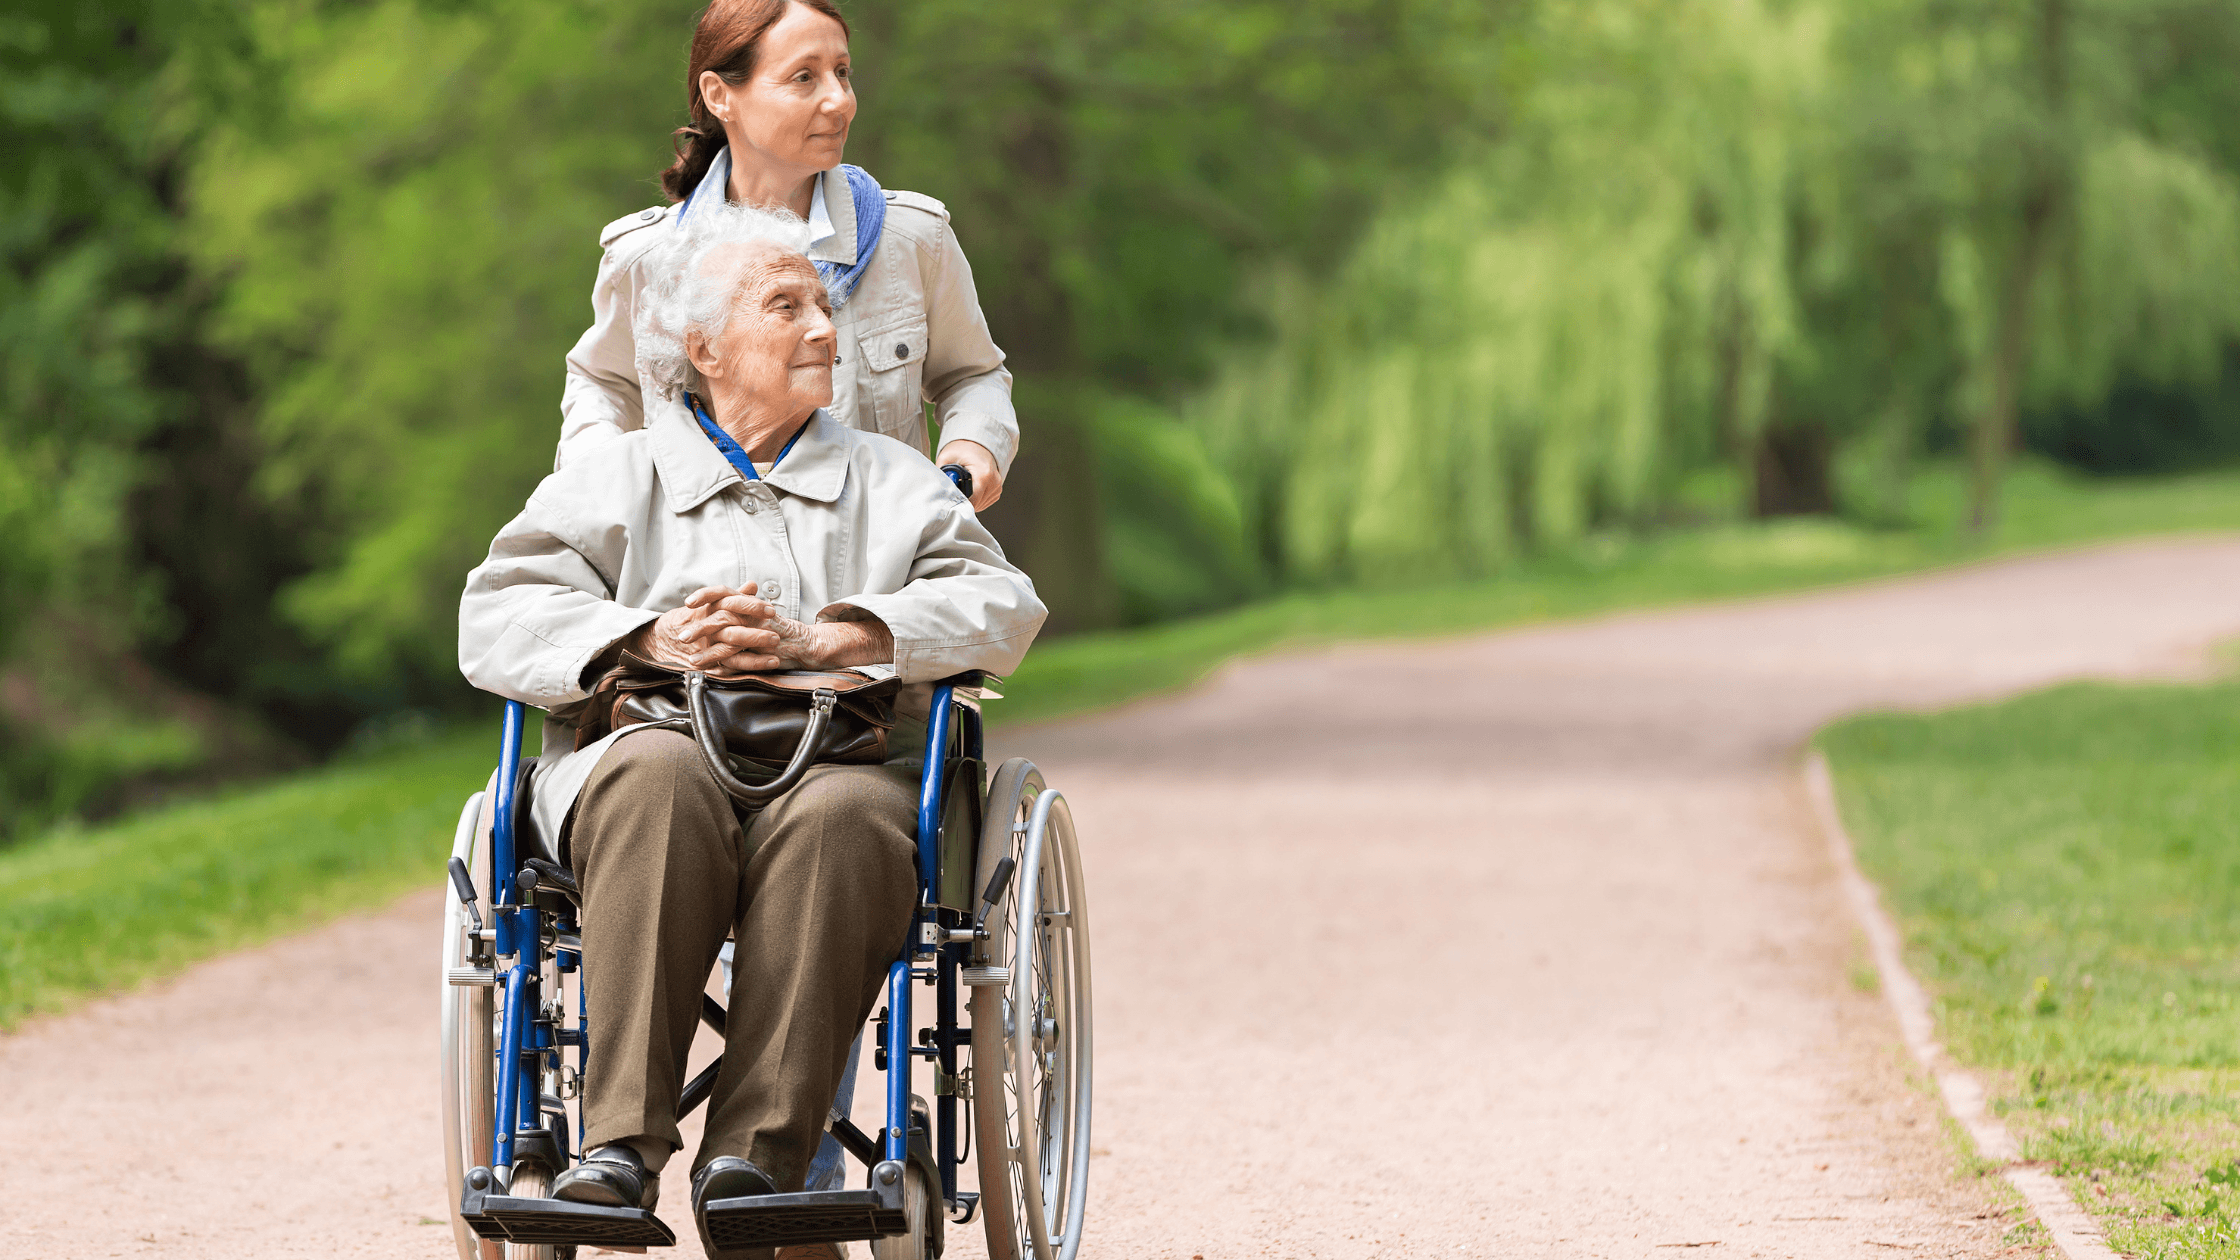 American Grand - Maintaining Independence in Assisted Living